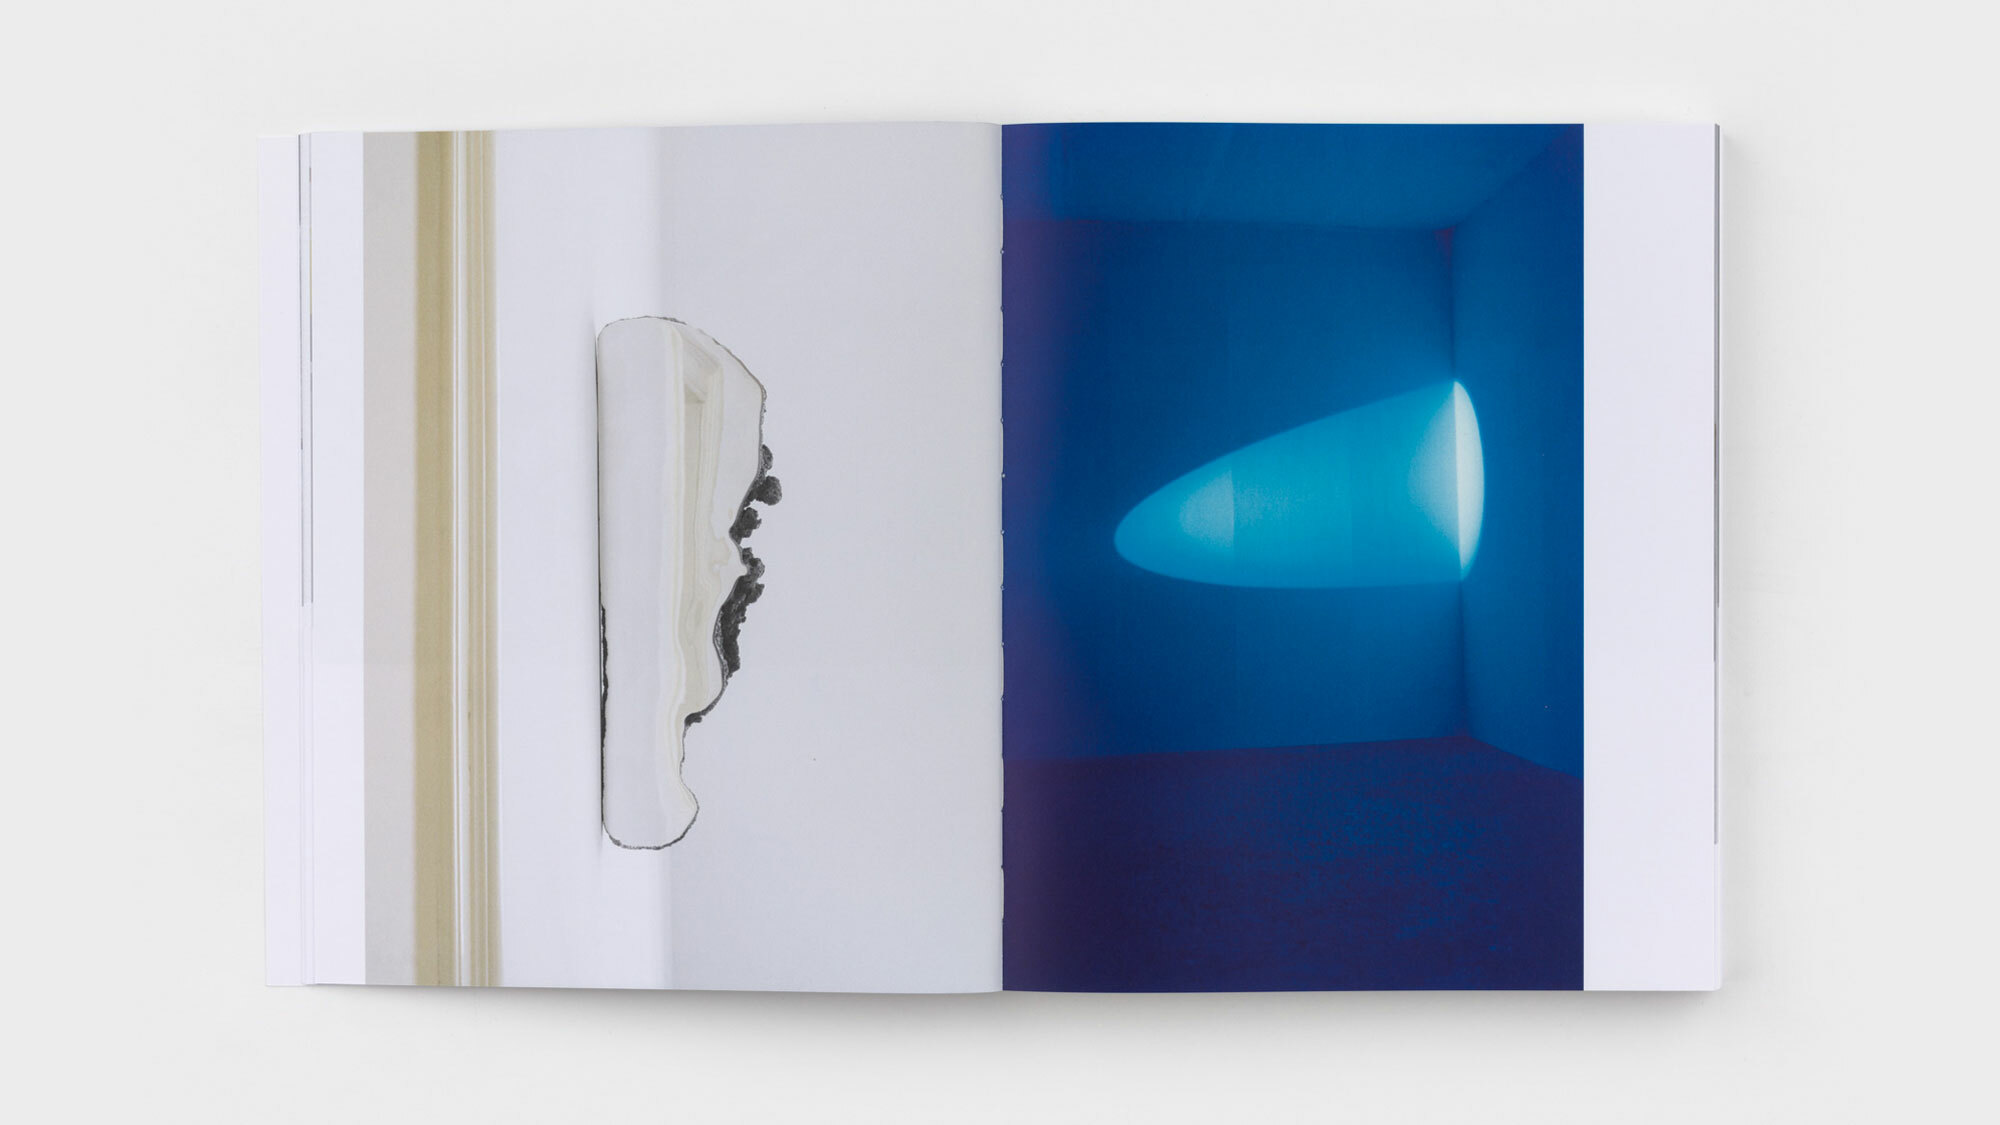 Here again, a juxtaposition. François has adjoined a mirror to one side of a geode. Janssens casts an ovular white light into the corner of a room drenched in blue. 